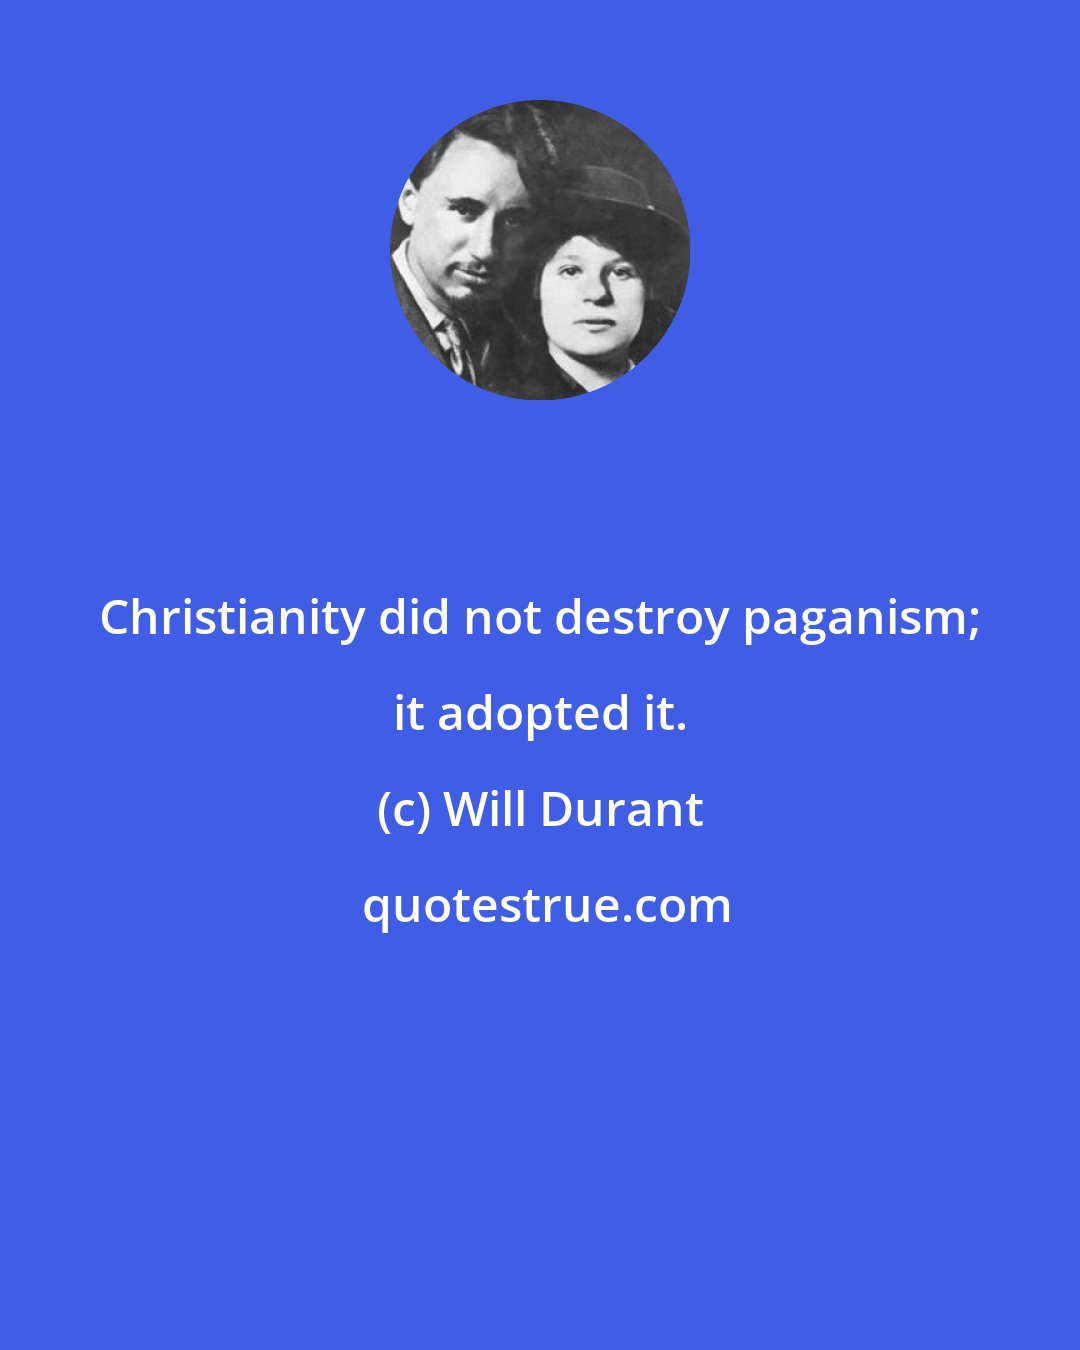 Will Durant: Christianity did not destroy paganism; it adopted it.